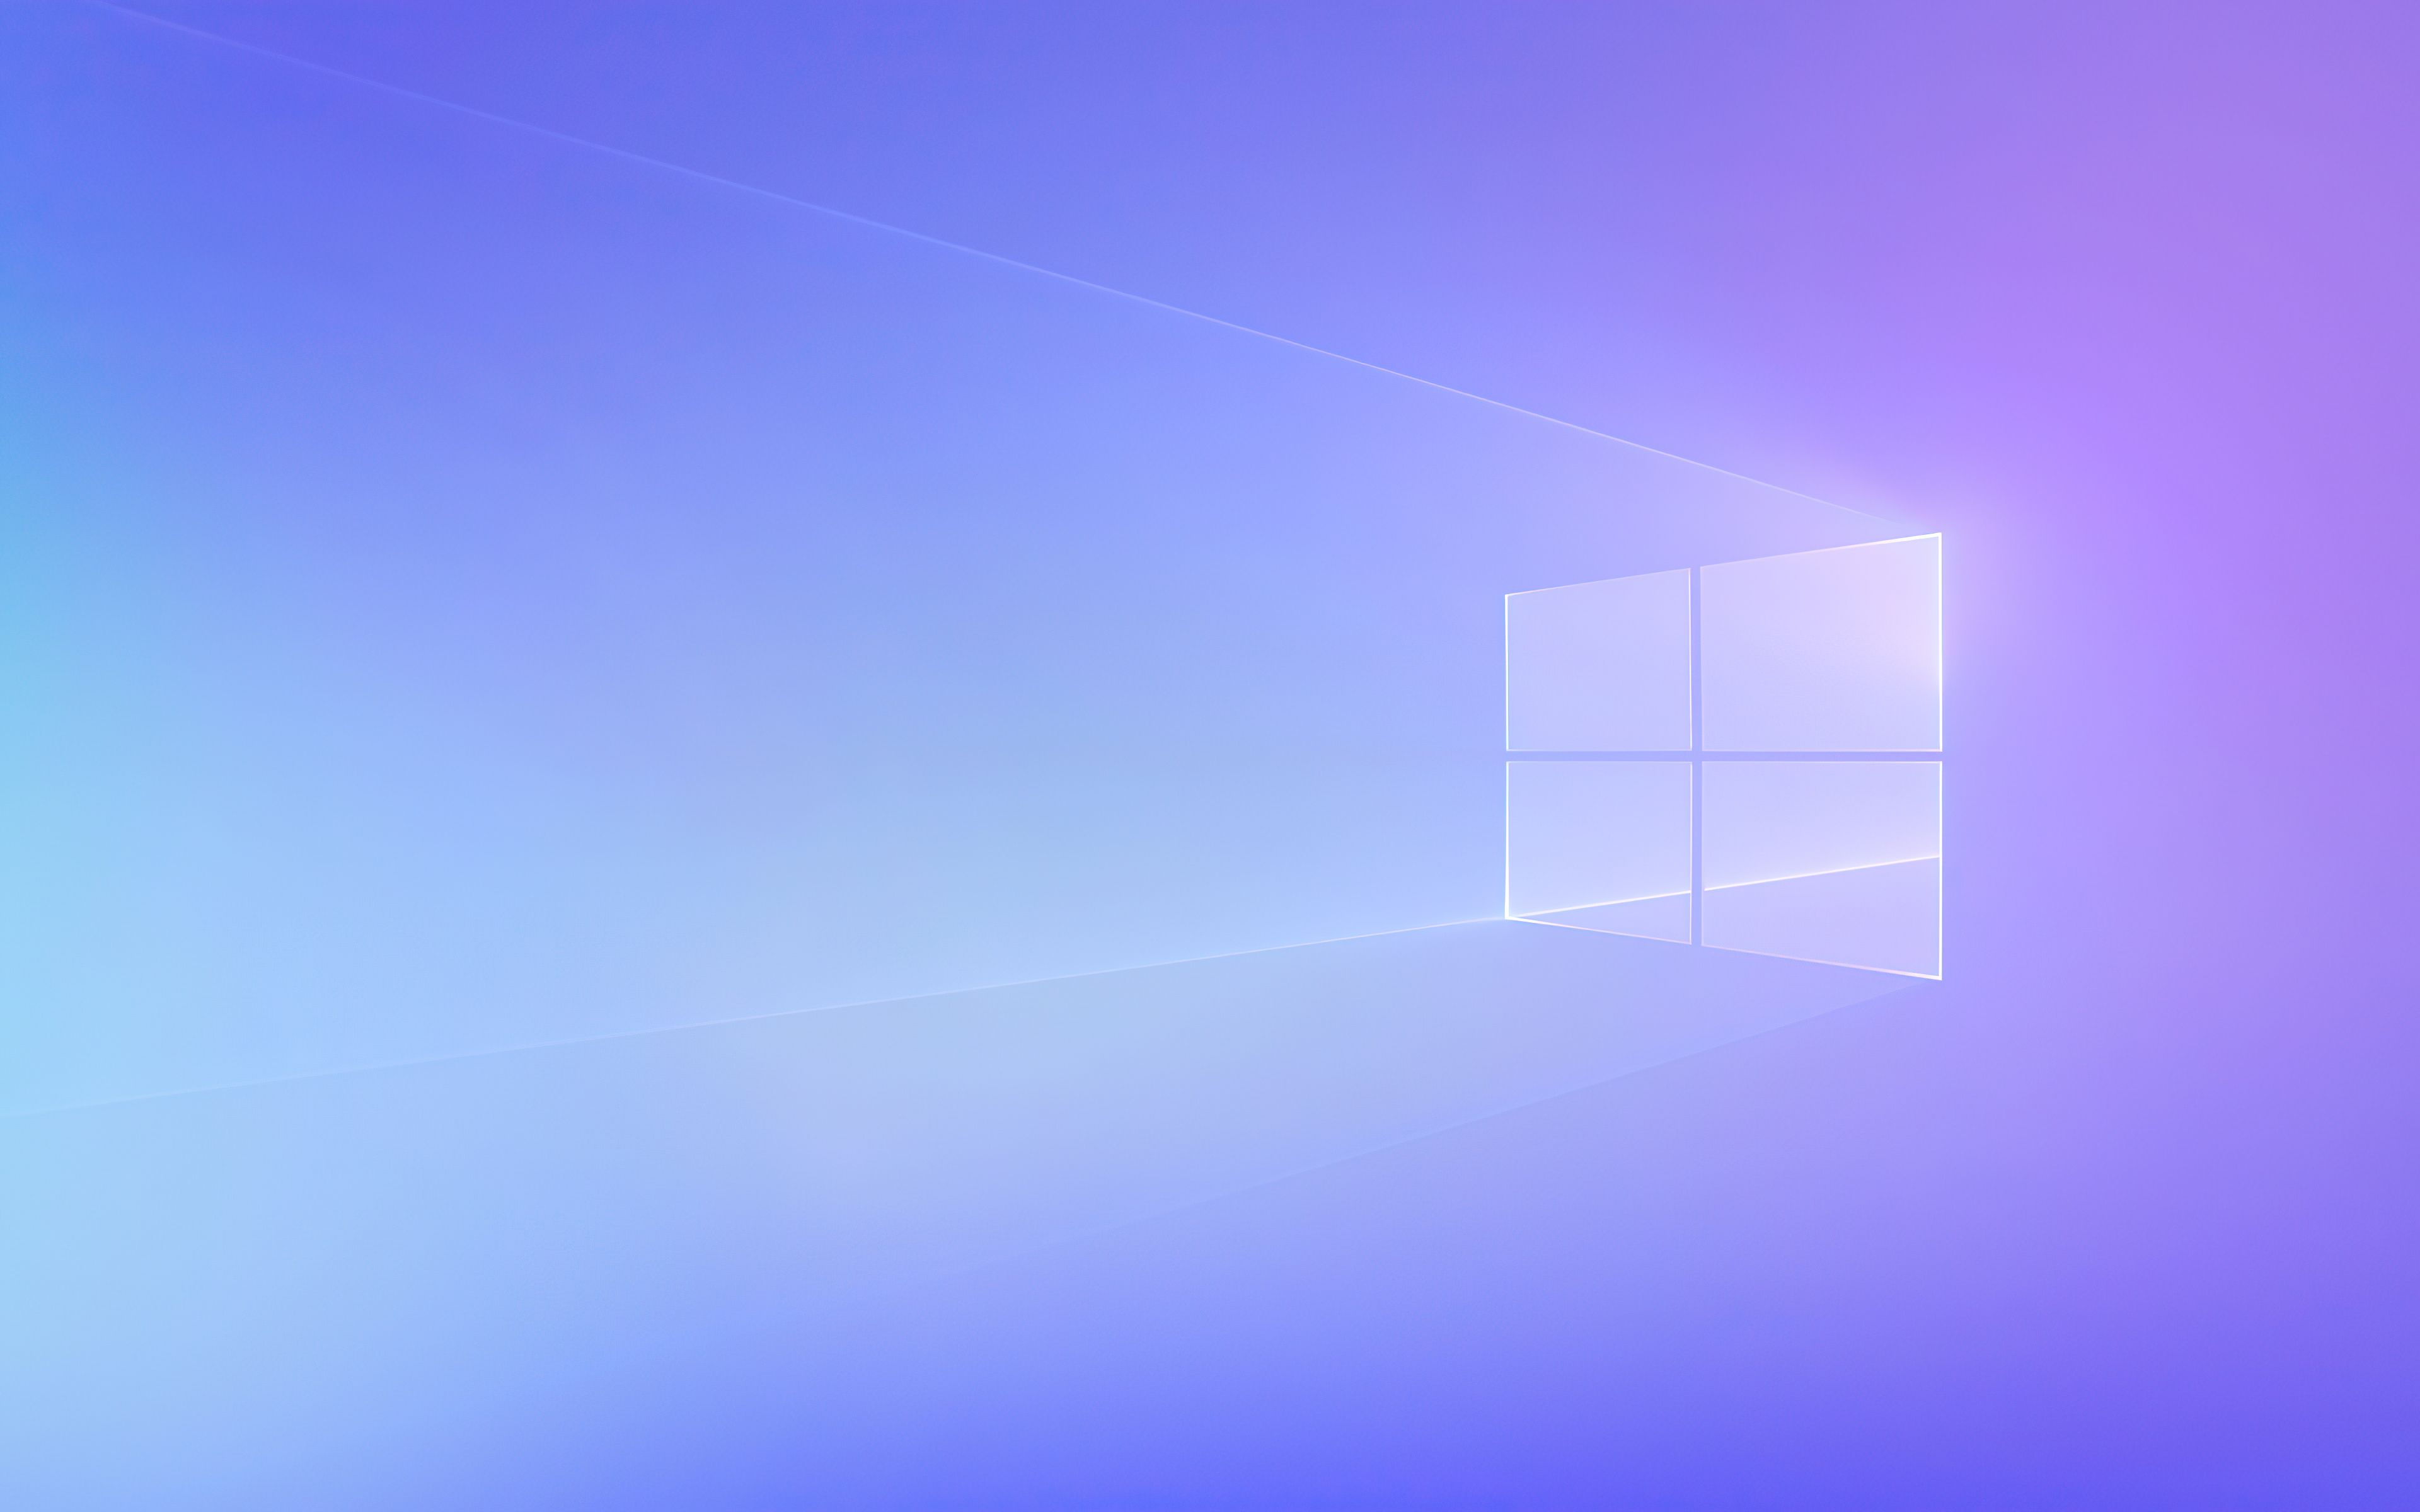 Windows 10 wallpaper with a purple and blue theme - Windows 10